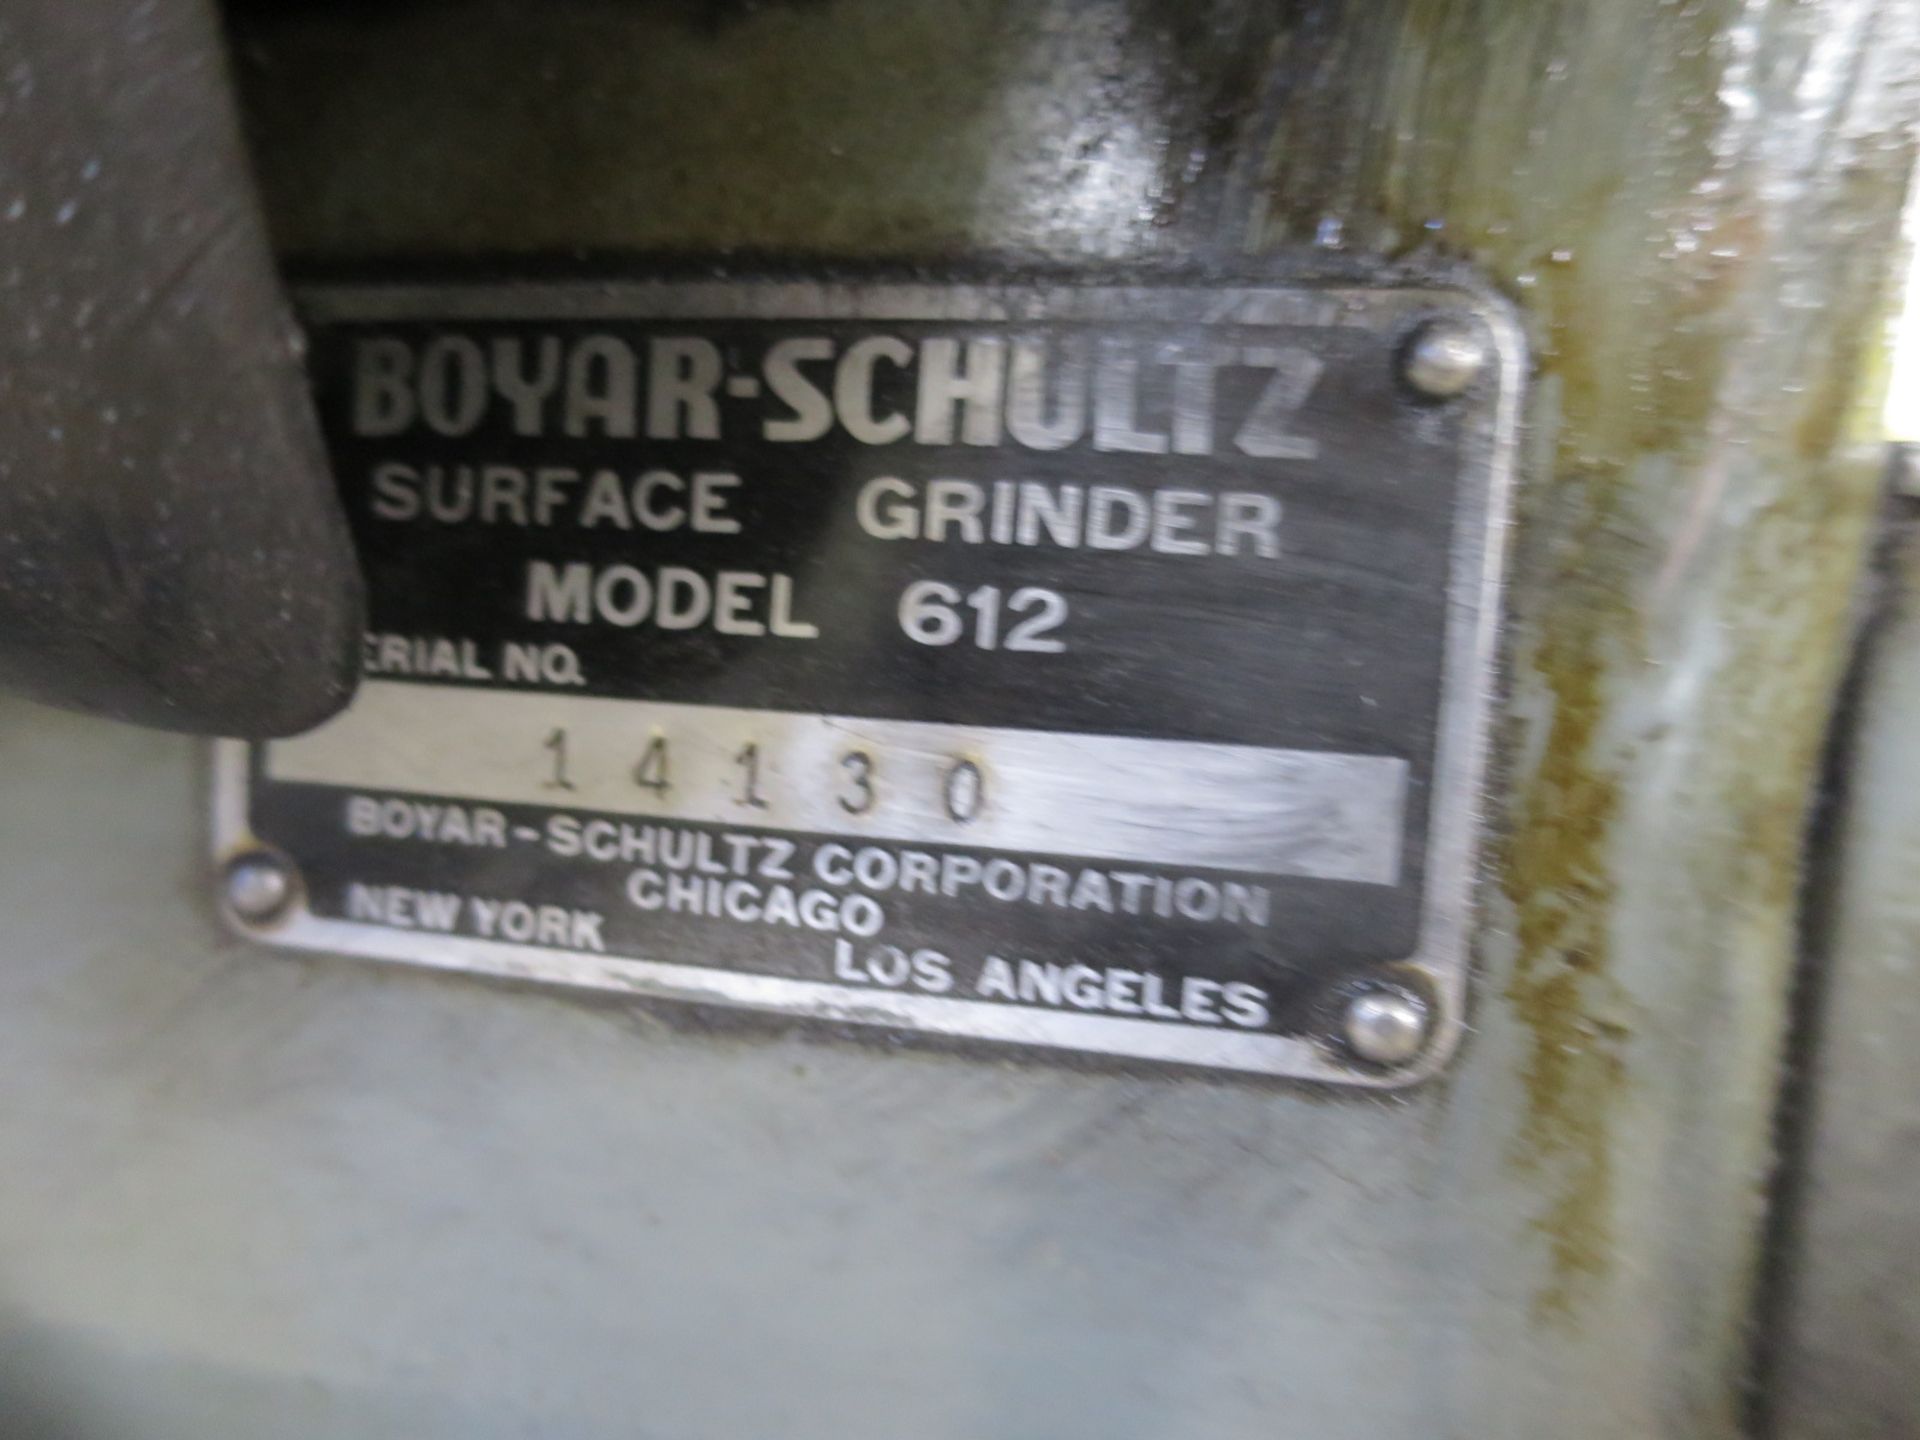 Boyar Schultz 612 Surface Grinder, Sn 14130 With Walker Ceramax Magnetic Chuck And Built In - Image 2 of 4